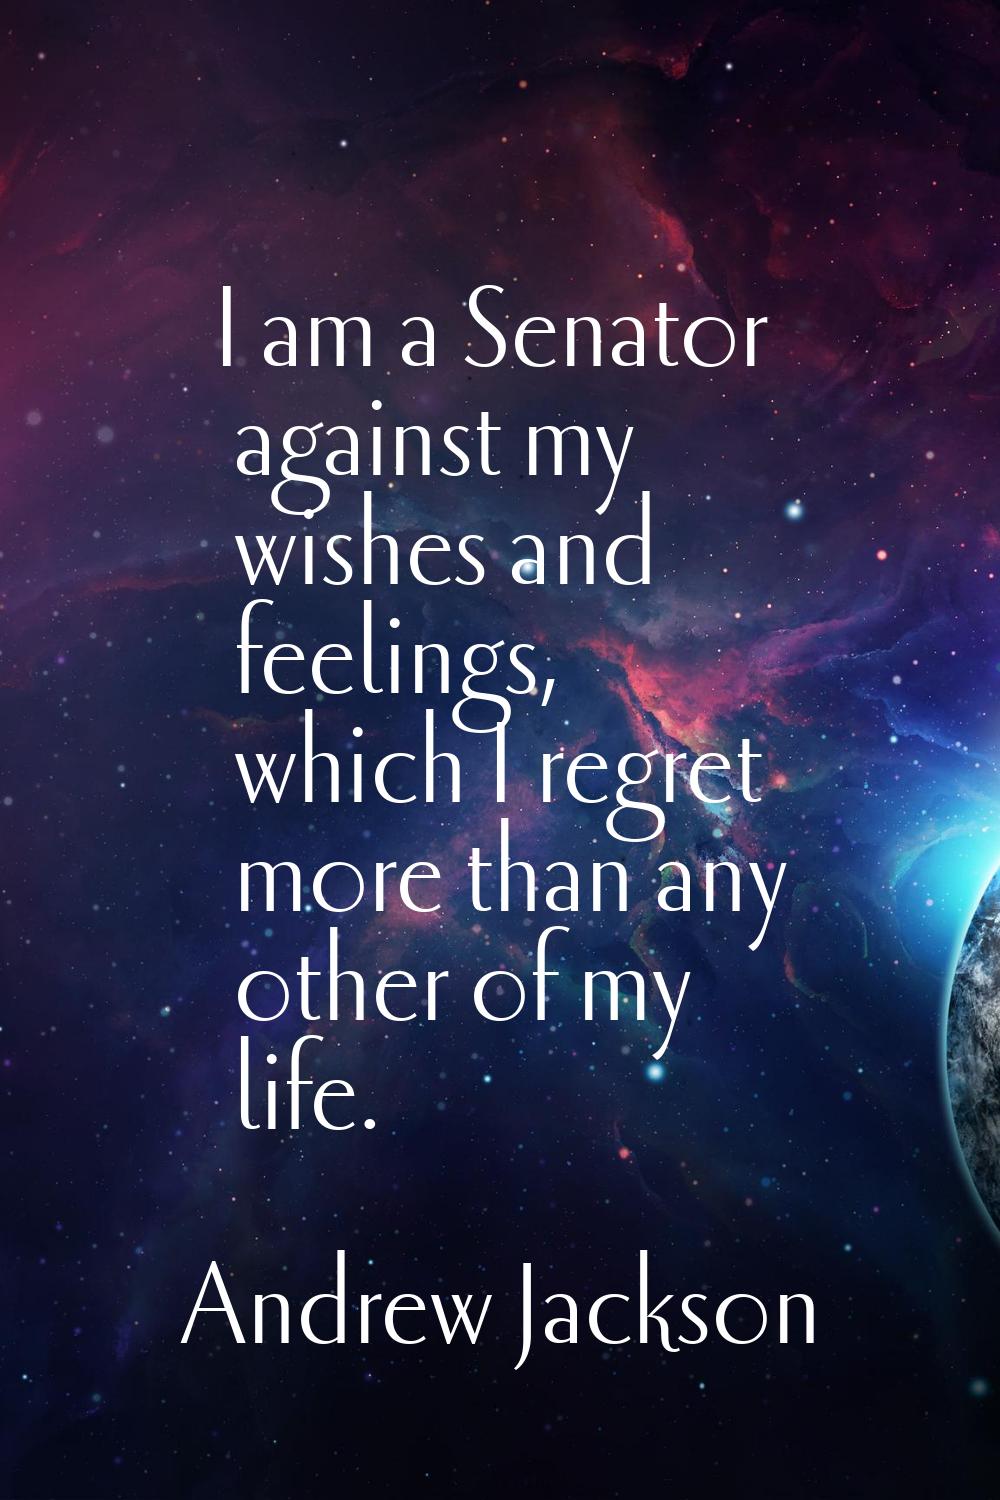 I am a Senator against my wishes and feelings, which I regret more than any other of my life.